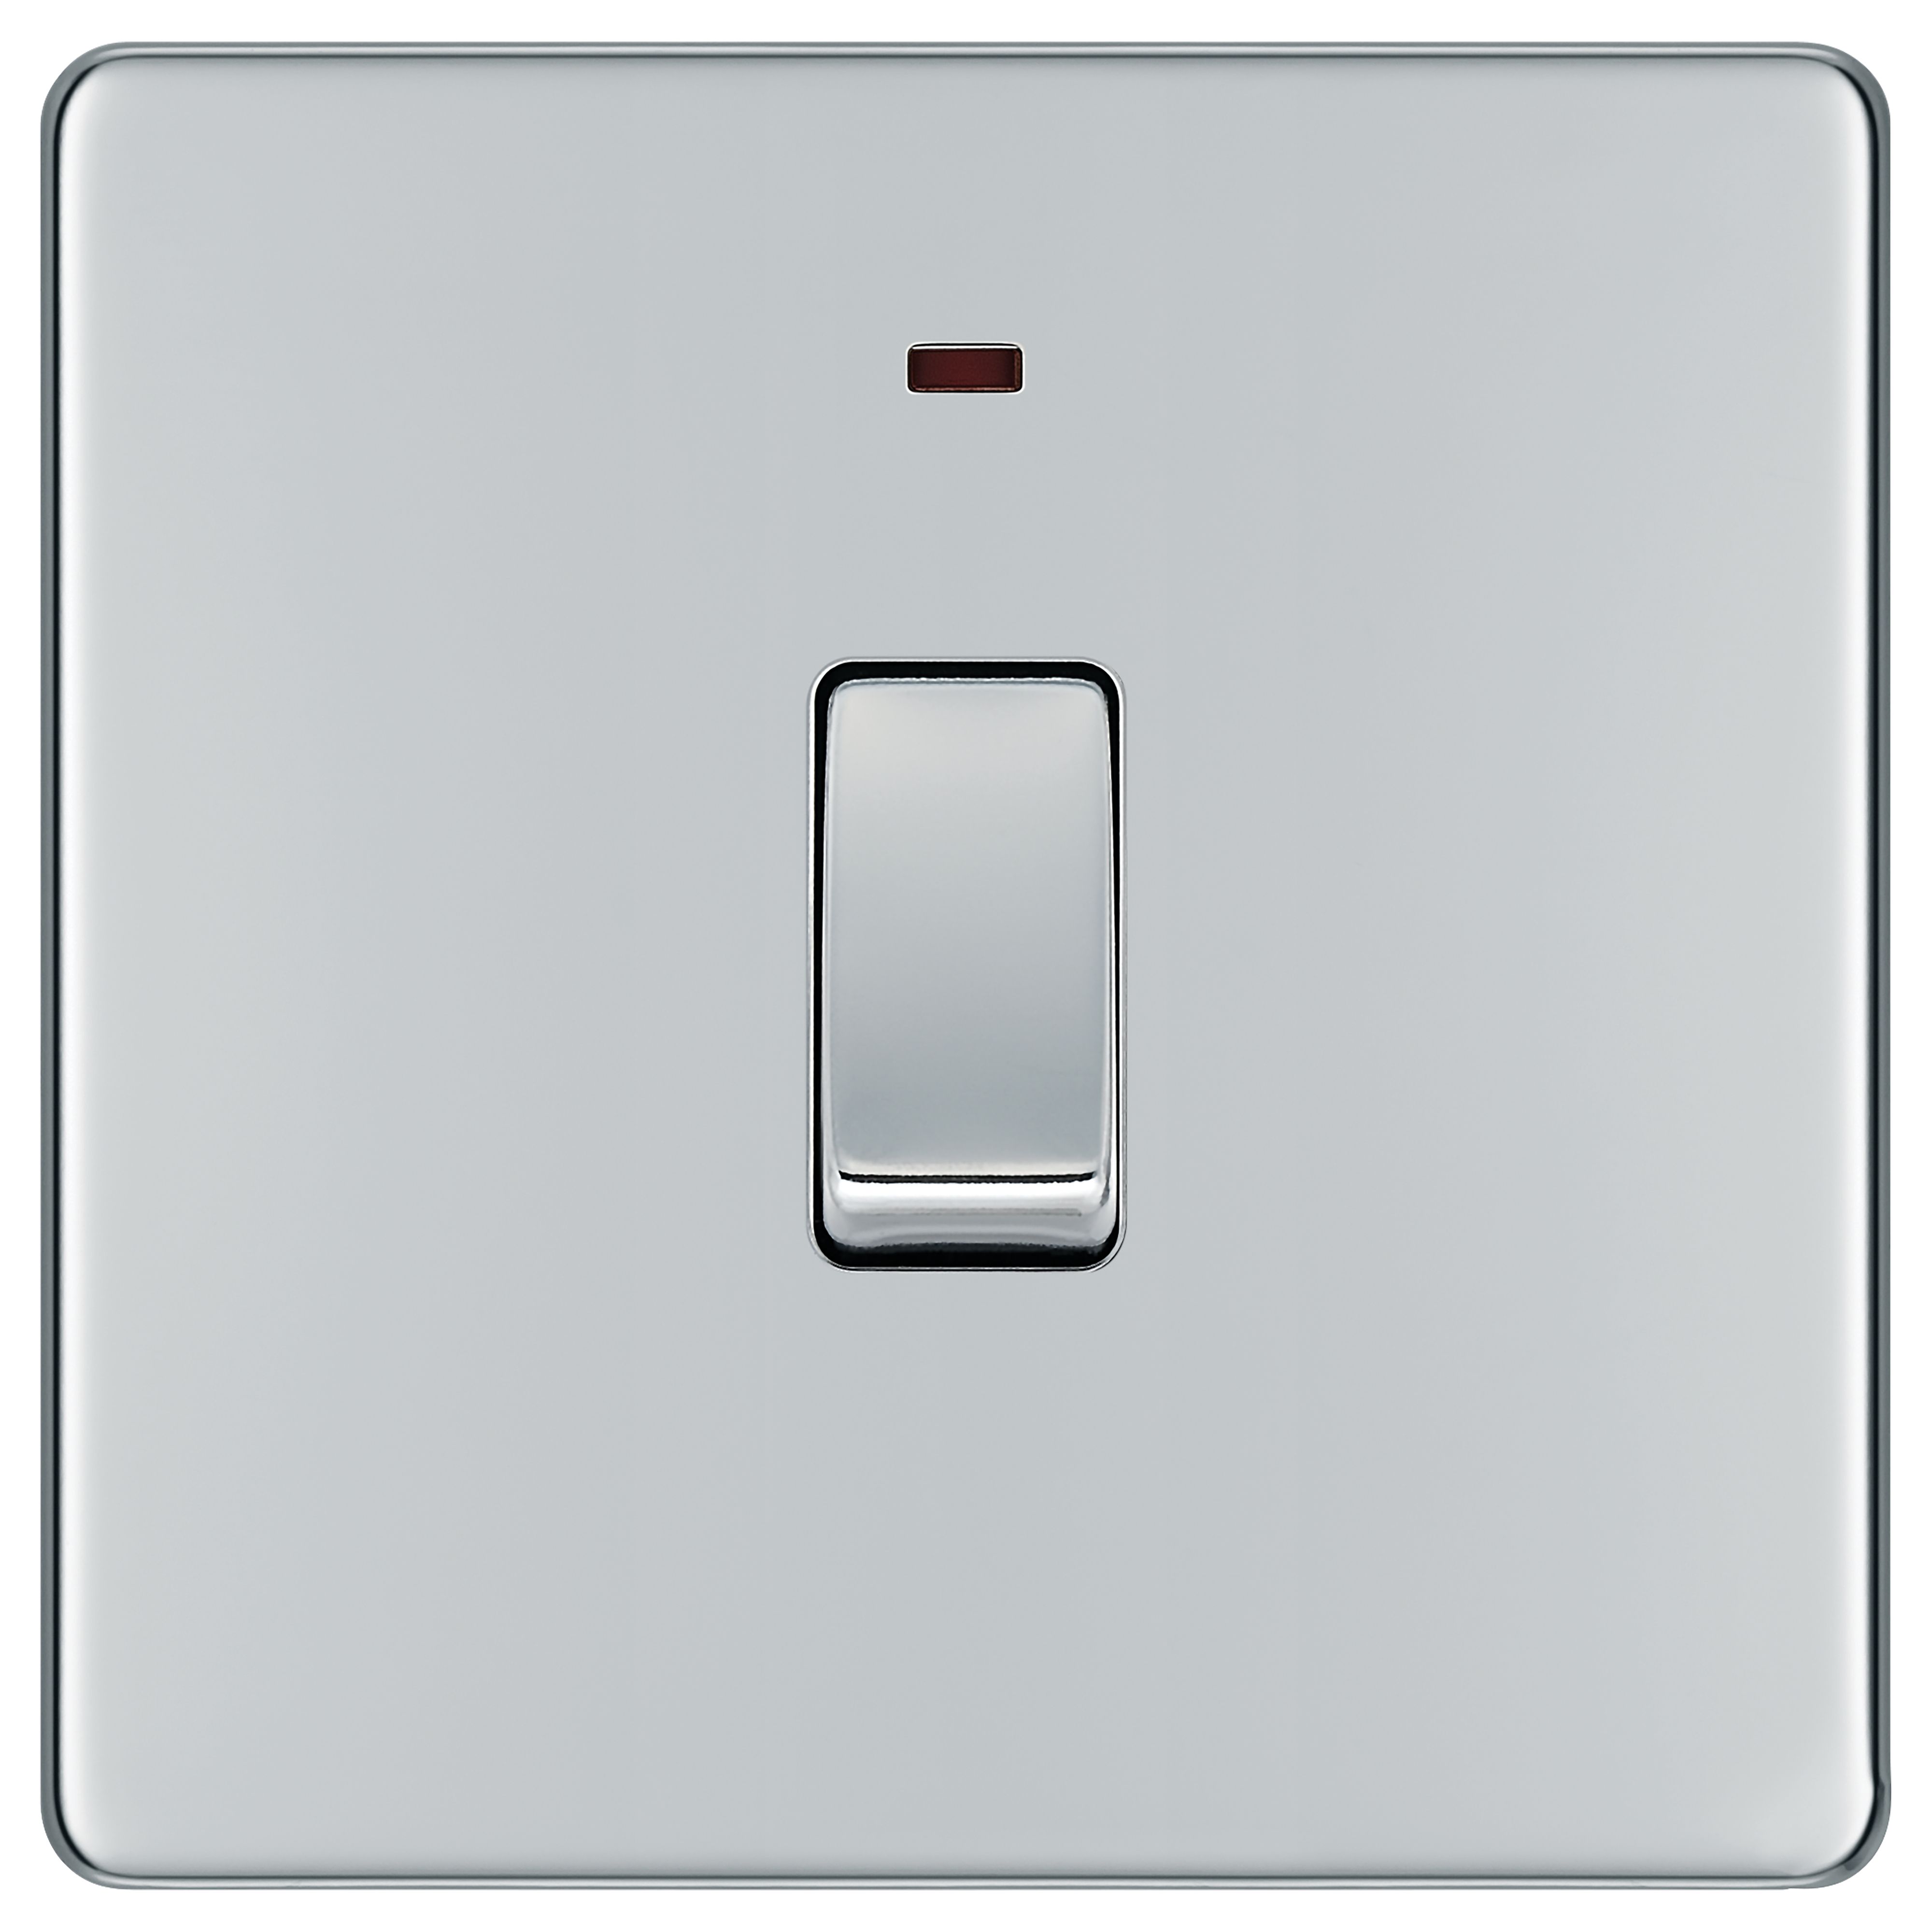 GoodHome 20A Rocker Flat Control switch with LED indicator Chrome effect